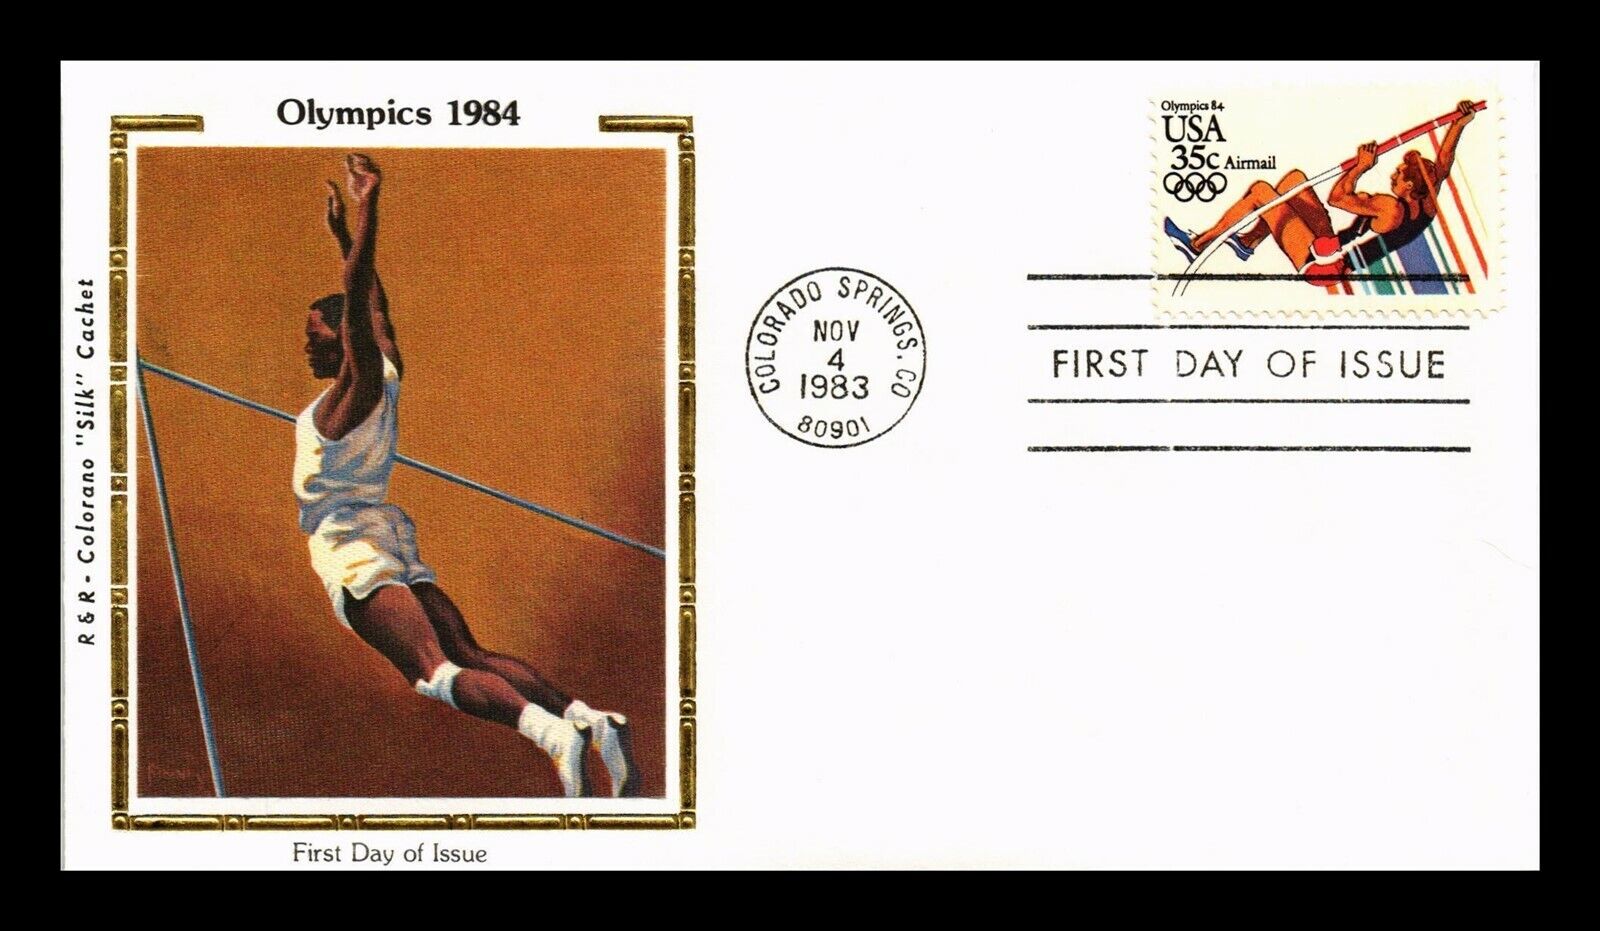 DR JIM STAMPS US OLYMPICS POLE VAULT AIRMAIL COVER COLORANO 爆売り FDC 【サイズ交換ＯＫ】 SILK 35C CACHET